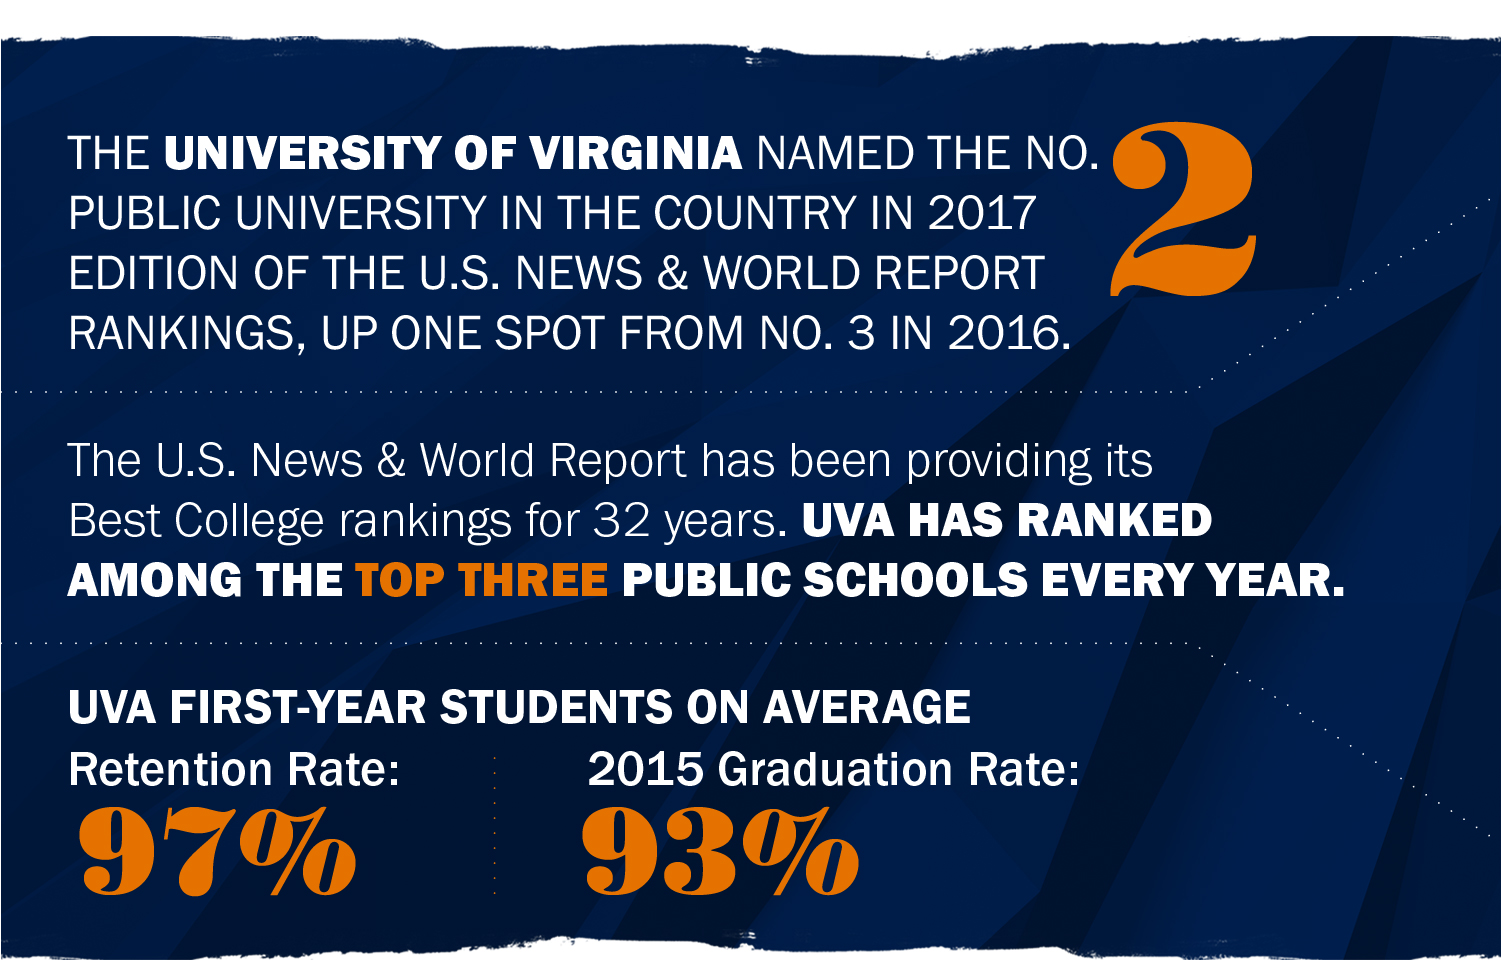 Text reads: The university of Virginia named the Number two public university in the country in 2017 edition of the U.S. News & world report rankings, up one spot from number 3 in 2016.  the U.S. News & World Report has been providing its Best College rankings for 32 years.  UVA has ranked among the top three public schools eery year.  UVA First-year students on Average retention rate: 97% 2015 Graduation Rate: 93%;